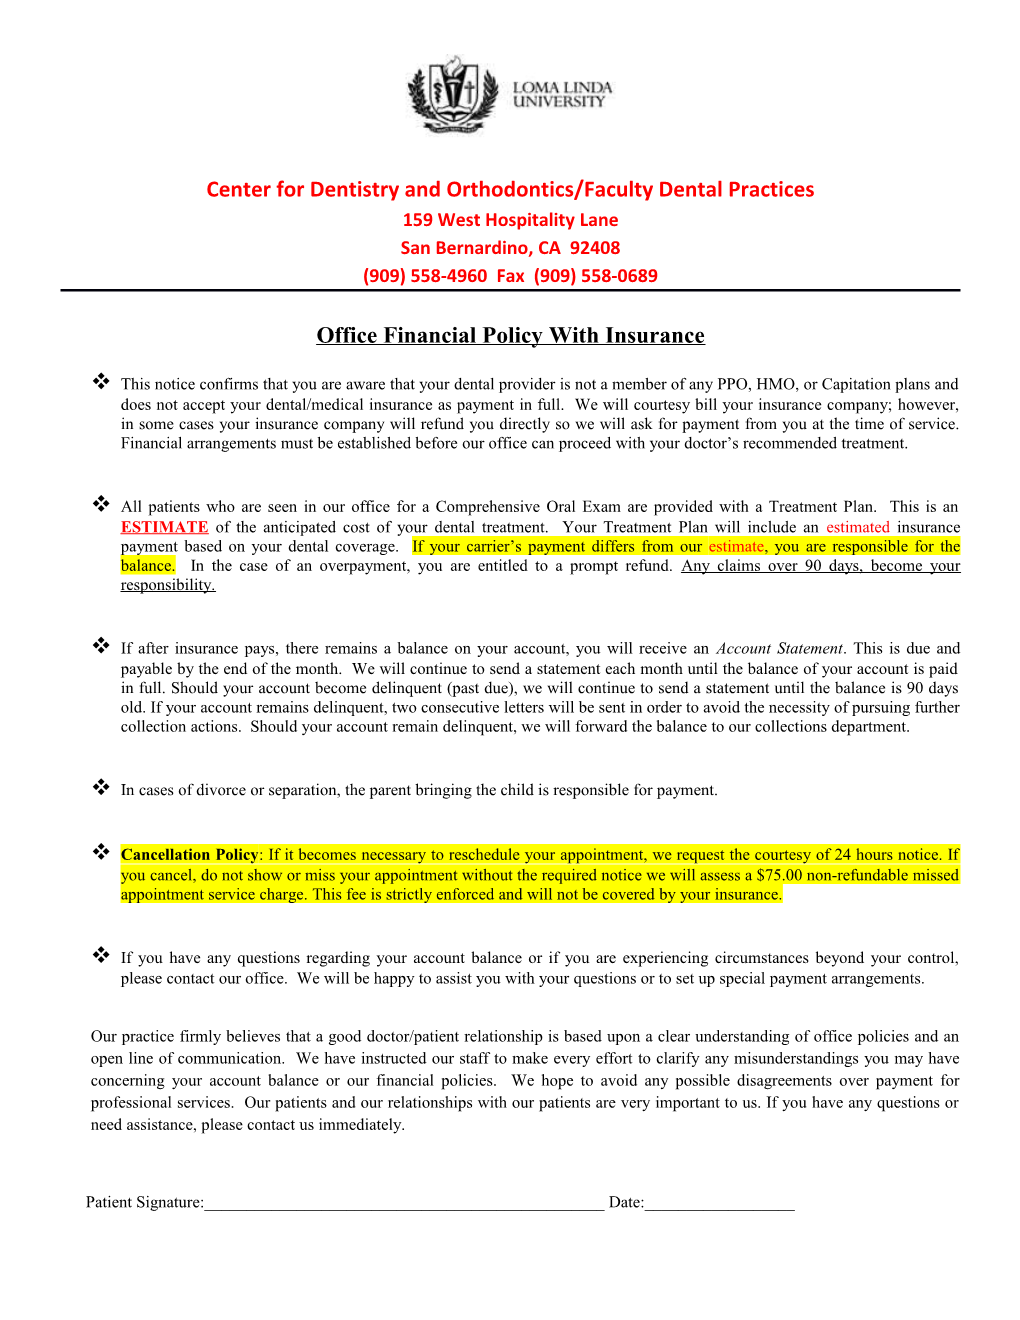 Center for Dentistry and Orthodontics/Faculty Dental Practices